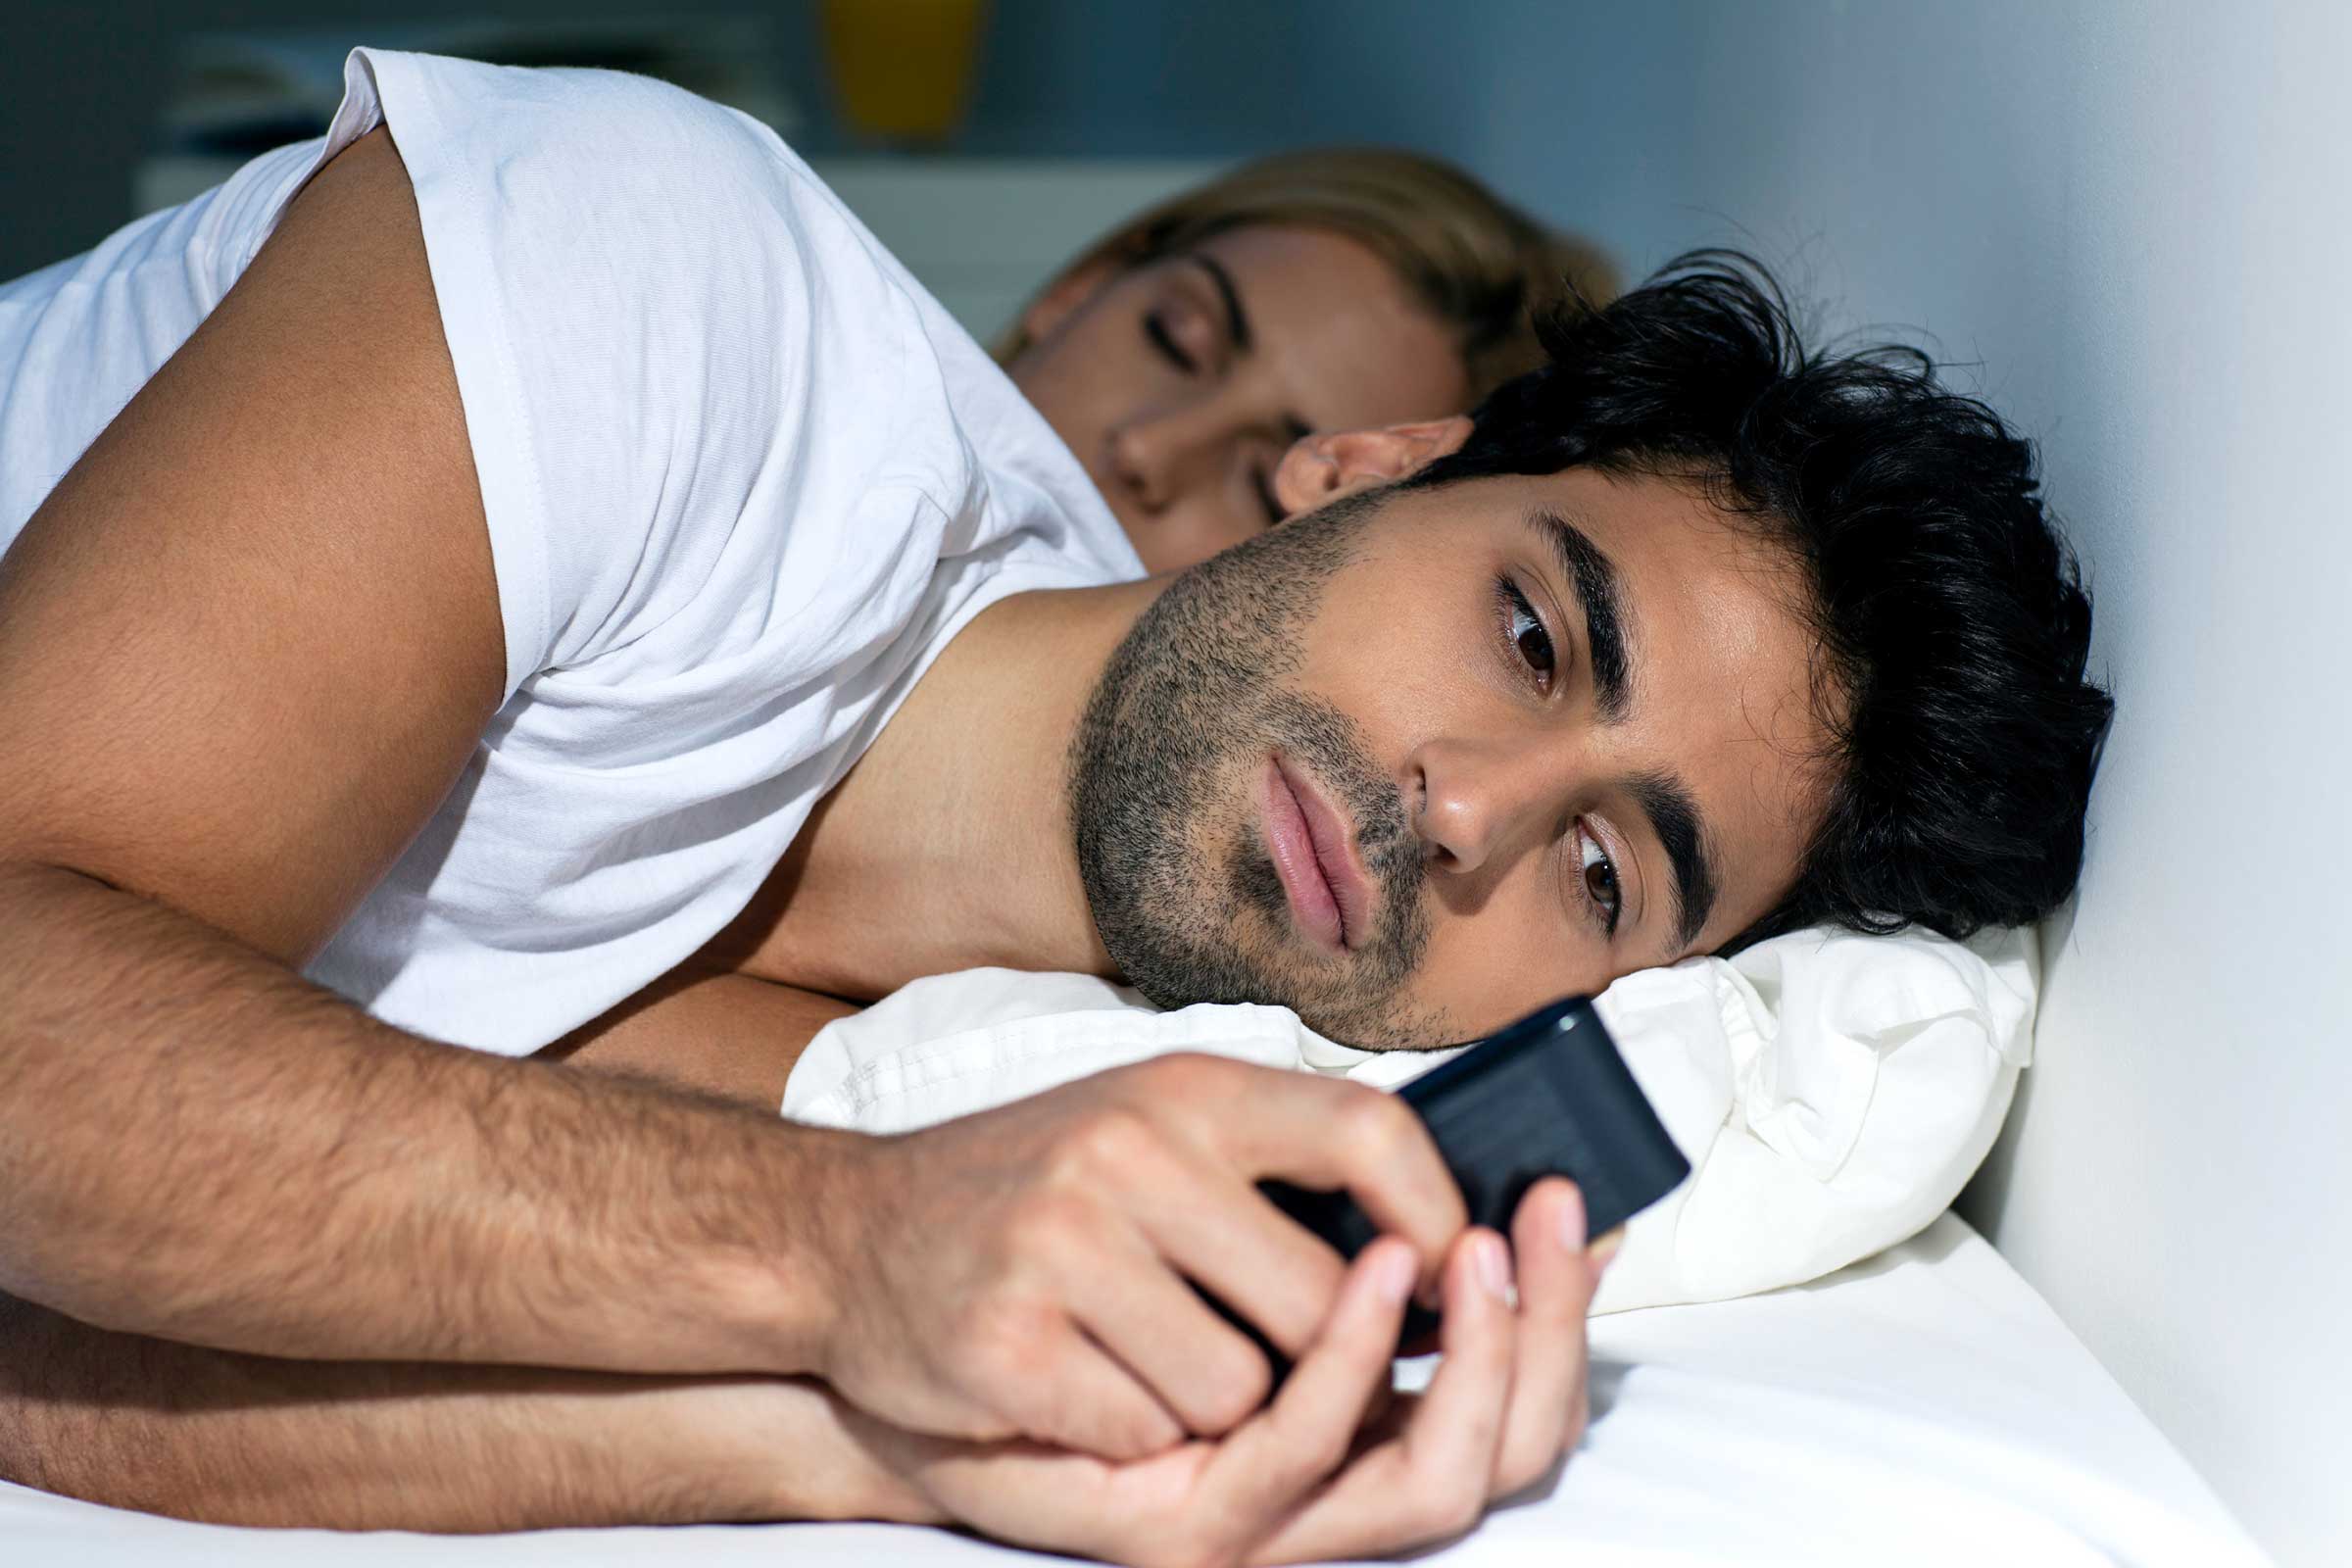 Five quick signs if your partner is cheating on